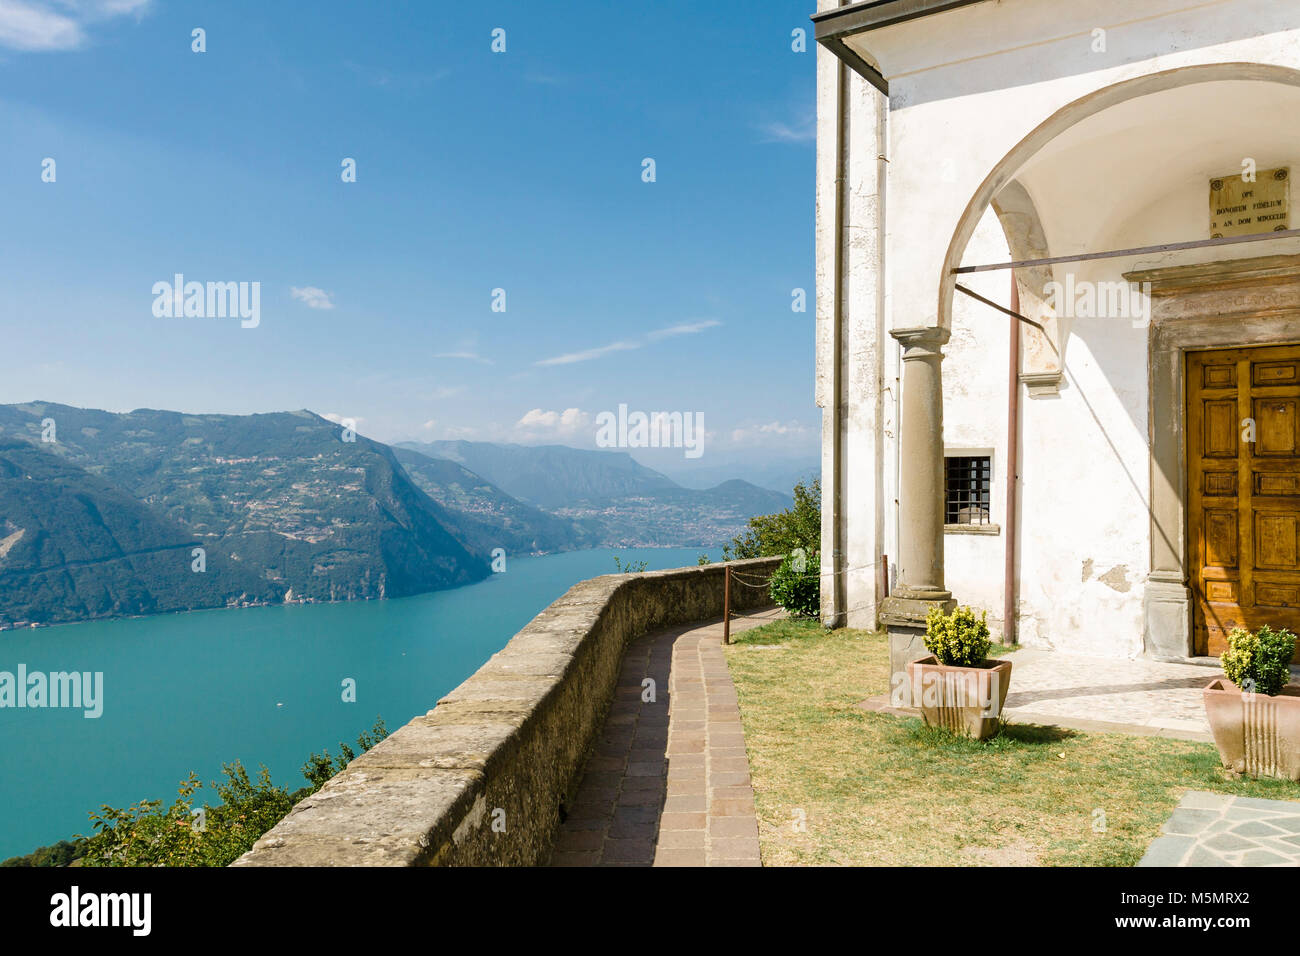 Santuario della Madonna della Ceriola, a small chapel at the top of the Island of Monte Isola overlooking Lake Iseo in Northern Italy. Stock Photo